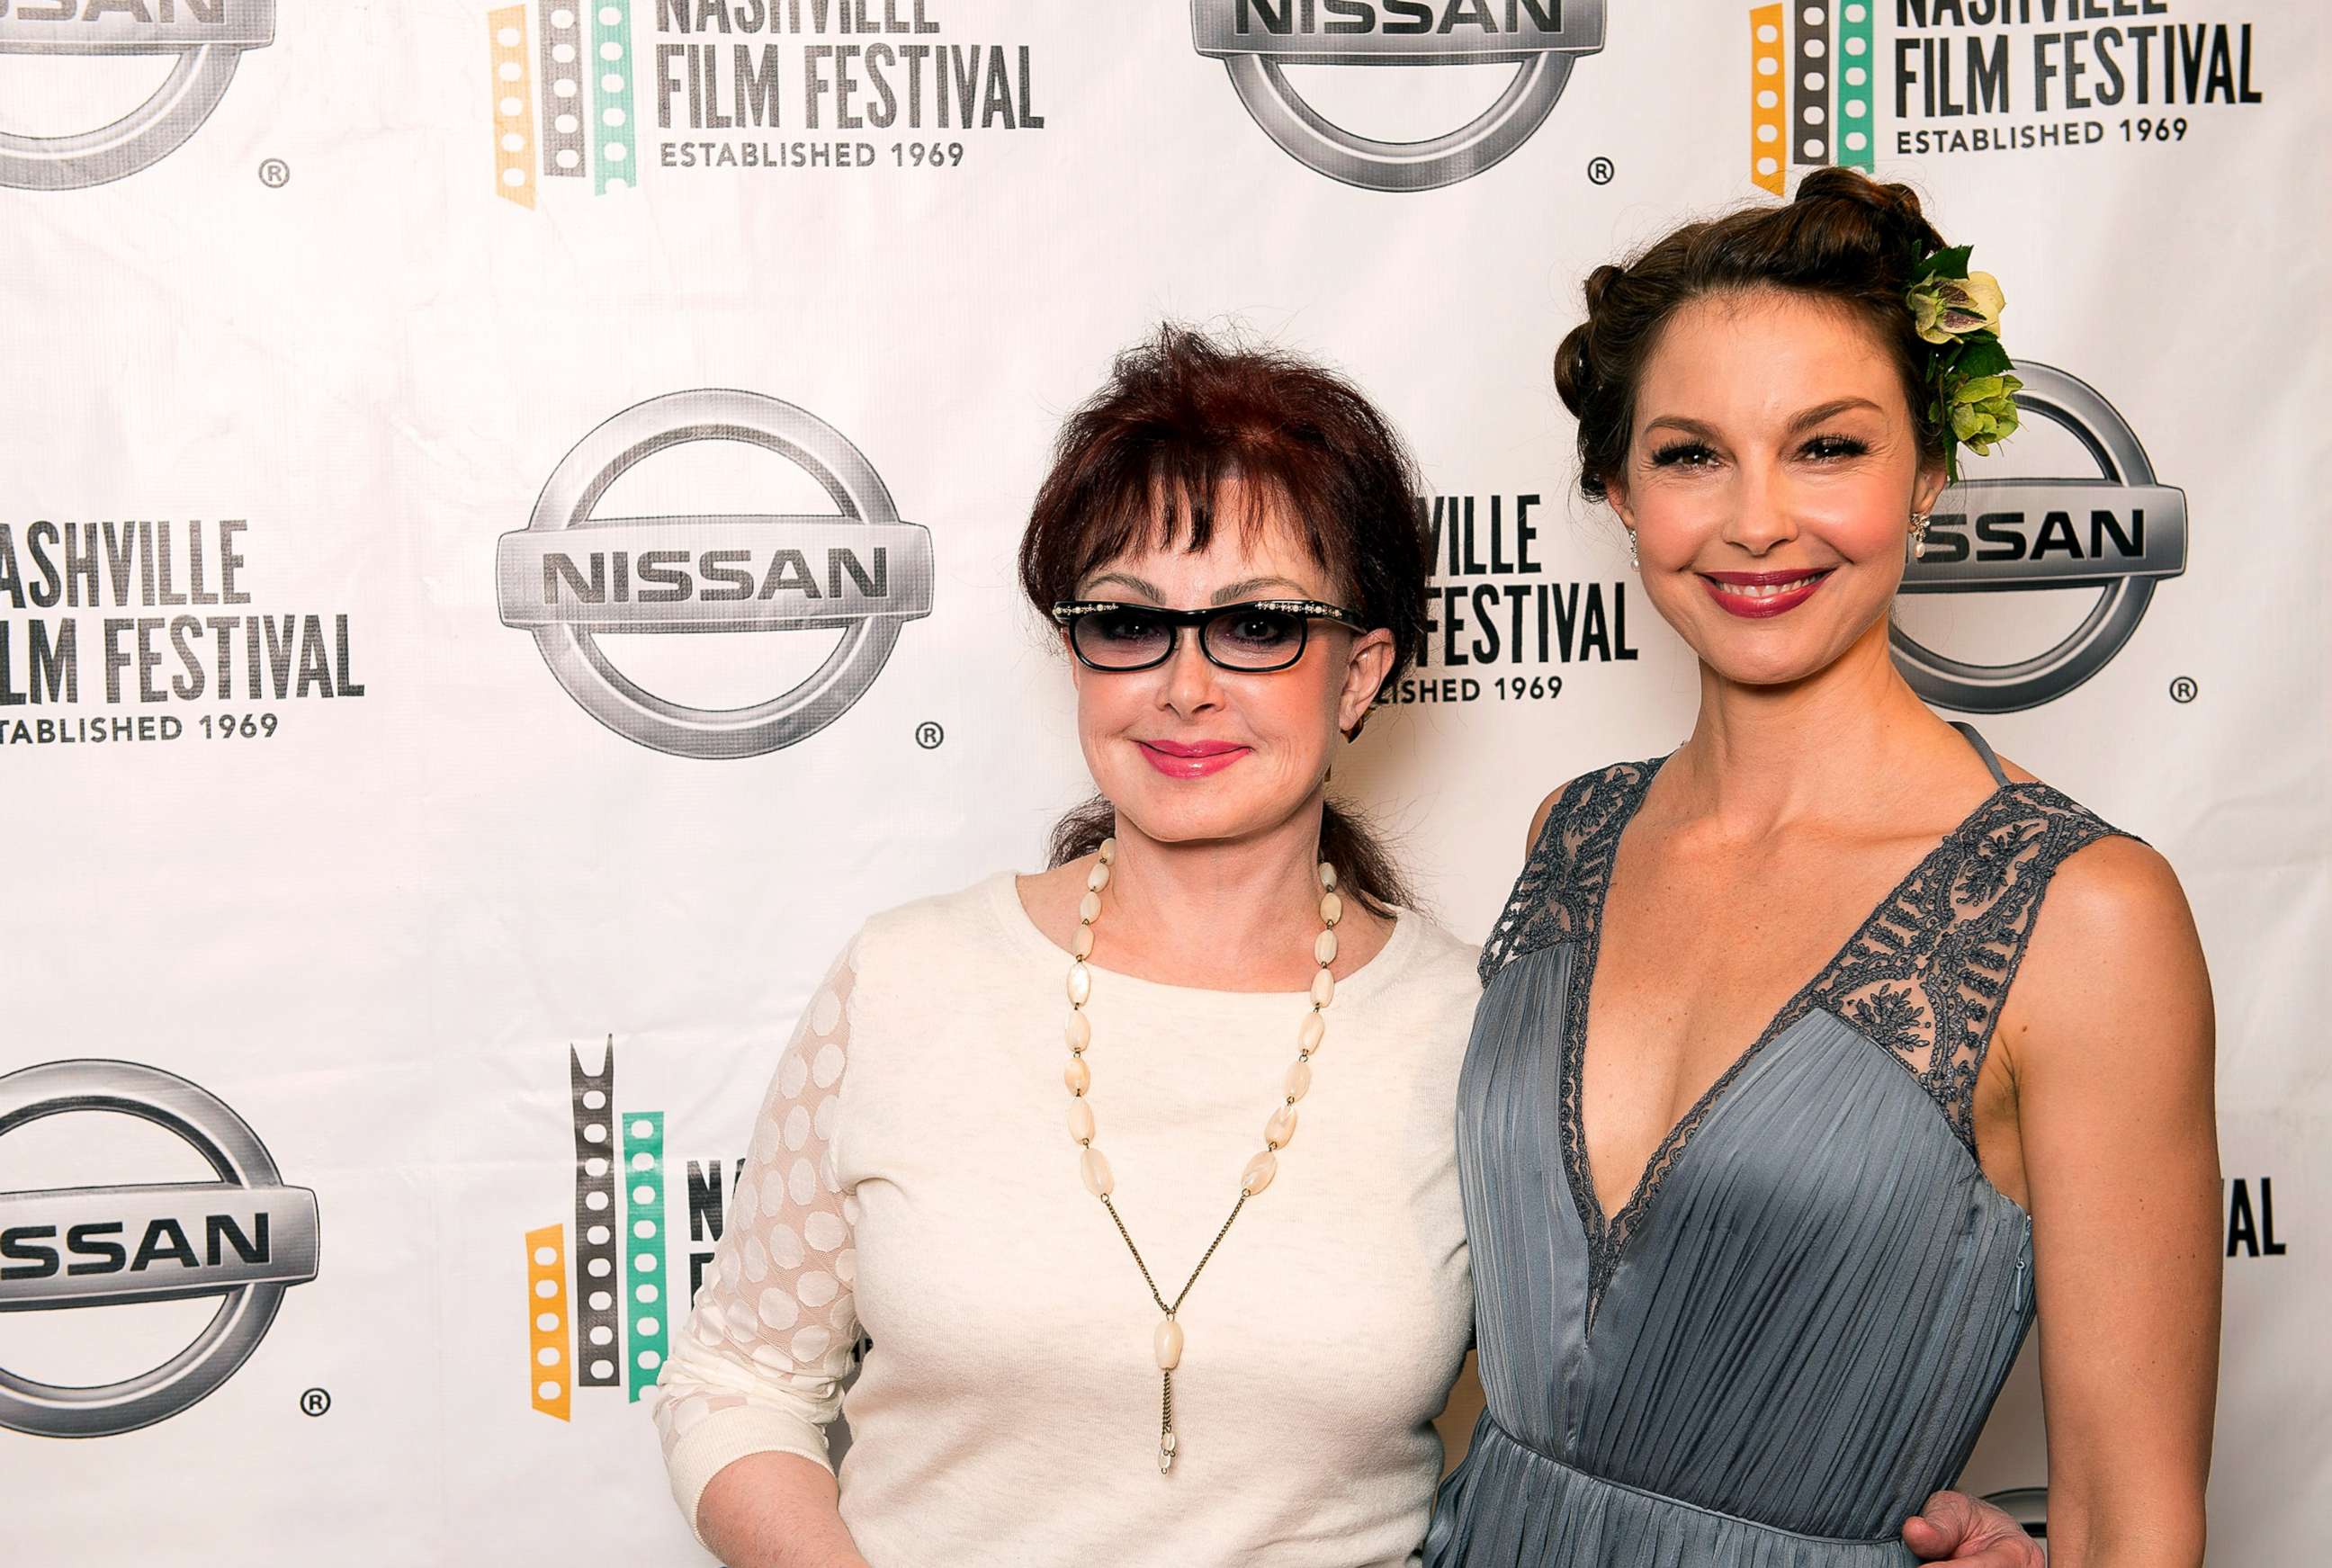 PHOTO: Naomi Judd and Ashley Judd attend the screening of "The Idenitical" on day 11 of the 2014 Nashville Film Festival at Regal Green Hills on April 26, 2014 in Nashville, Tennessee.